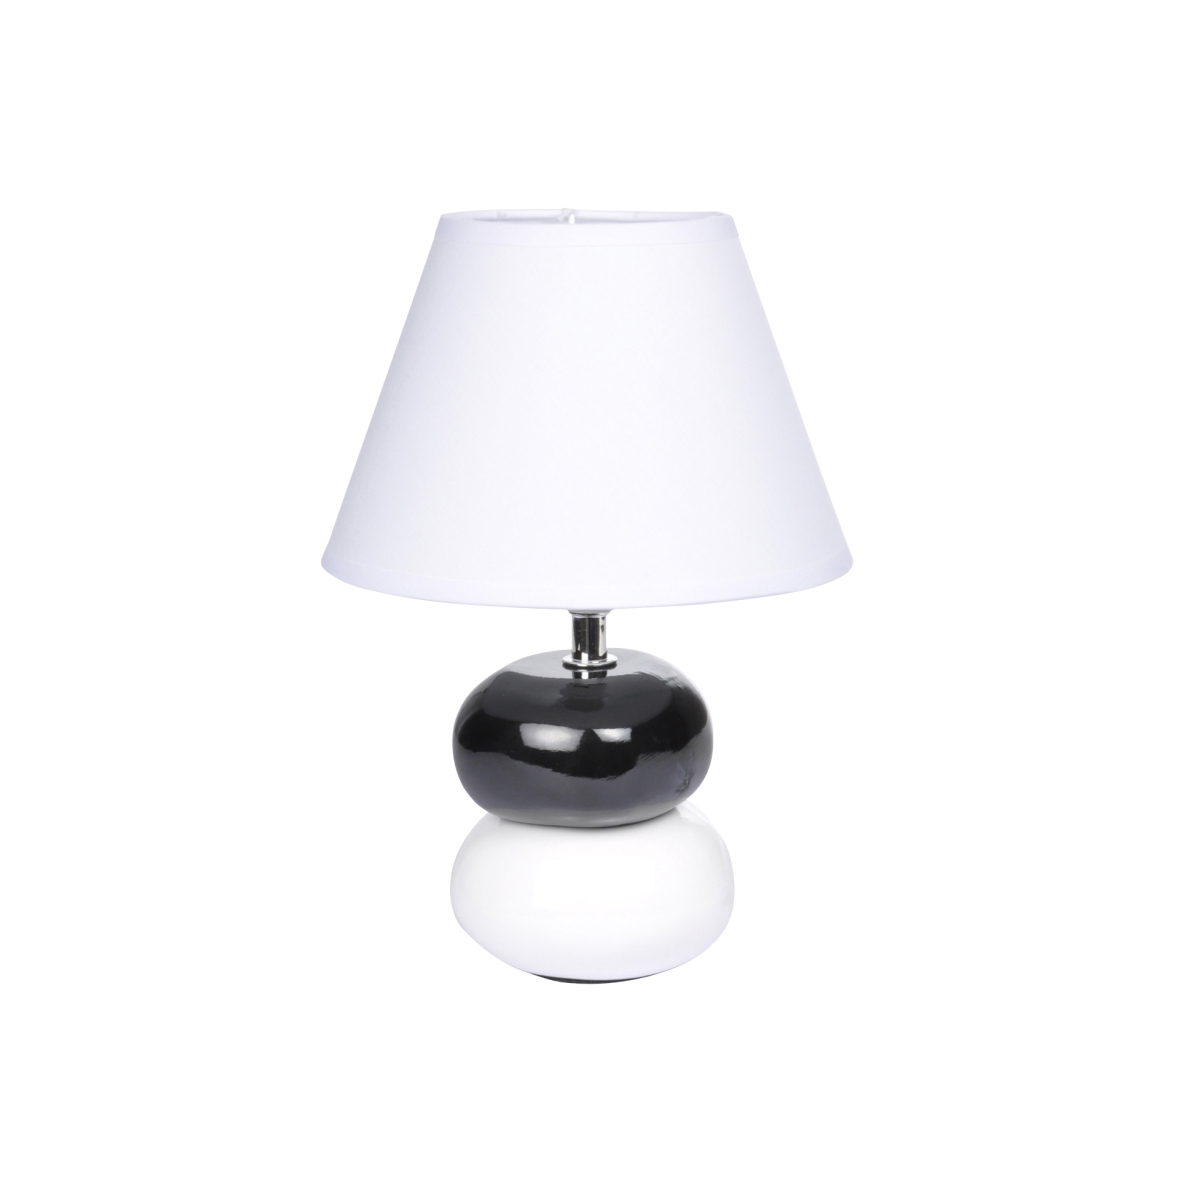 Lampe pied 2 galets blanc